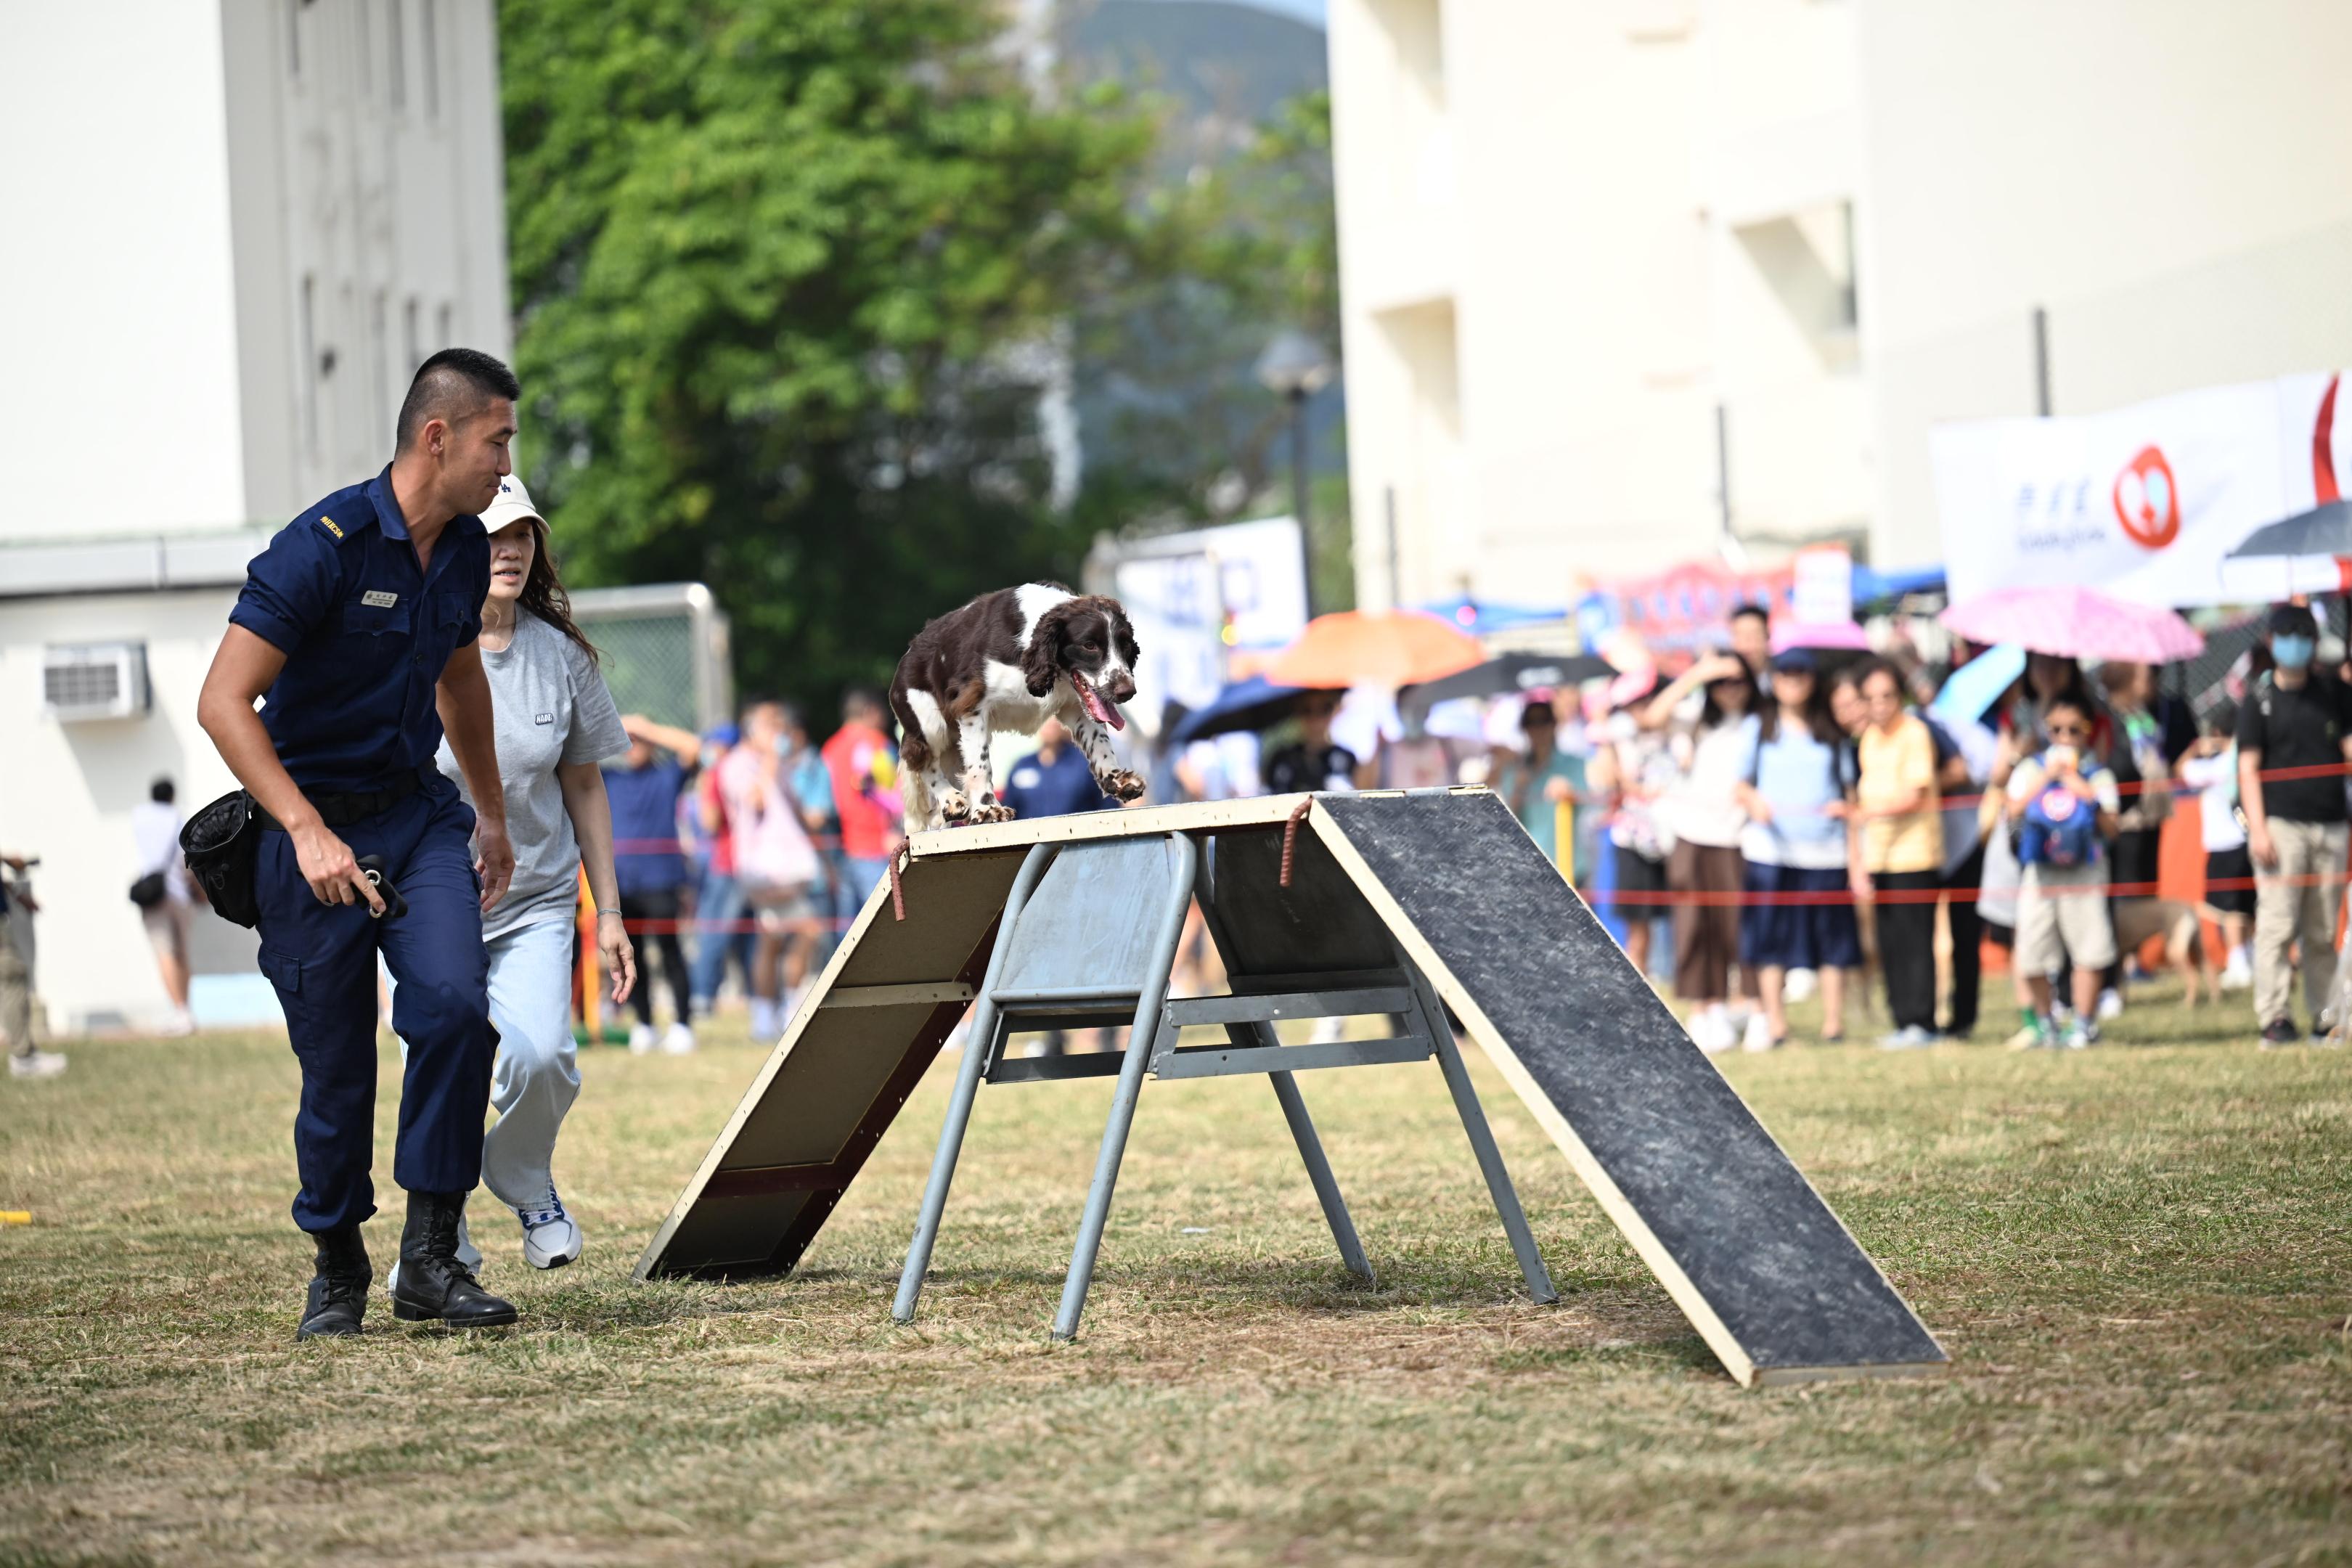 The Correctional Services Department (CSD) Sports Association held the CSD's 68th Autumn Fair at the football field adjacent to Stanley Prison today (November 4). Photo shows a performance by the CSD Dog Unit.